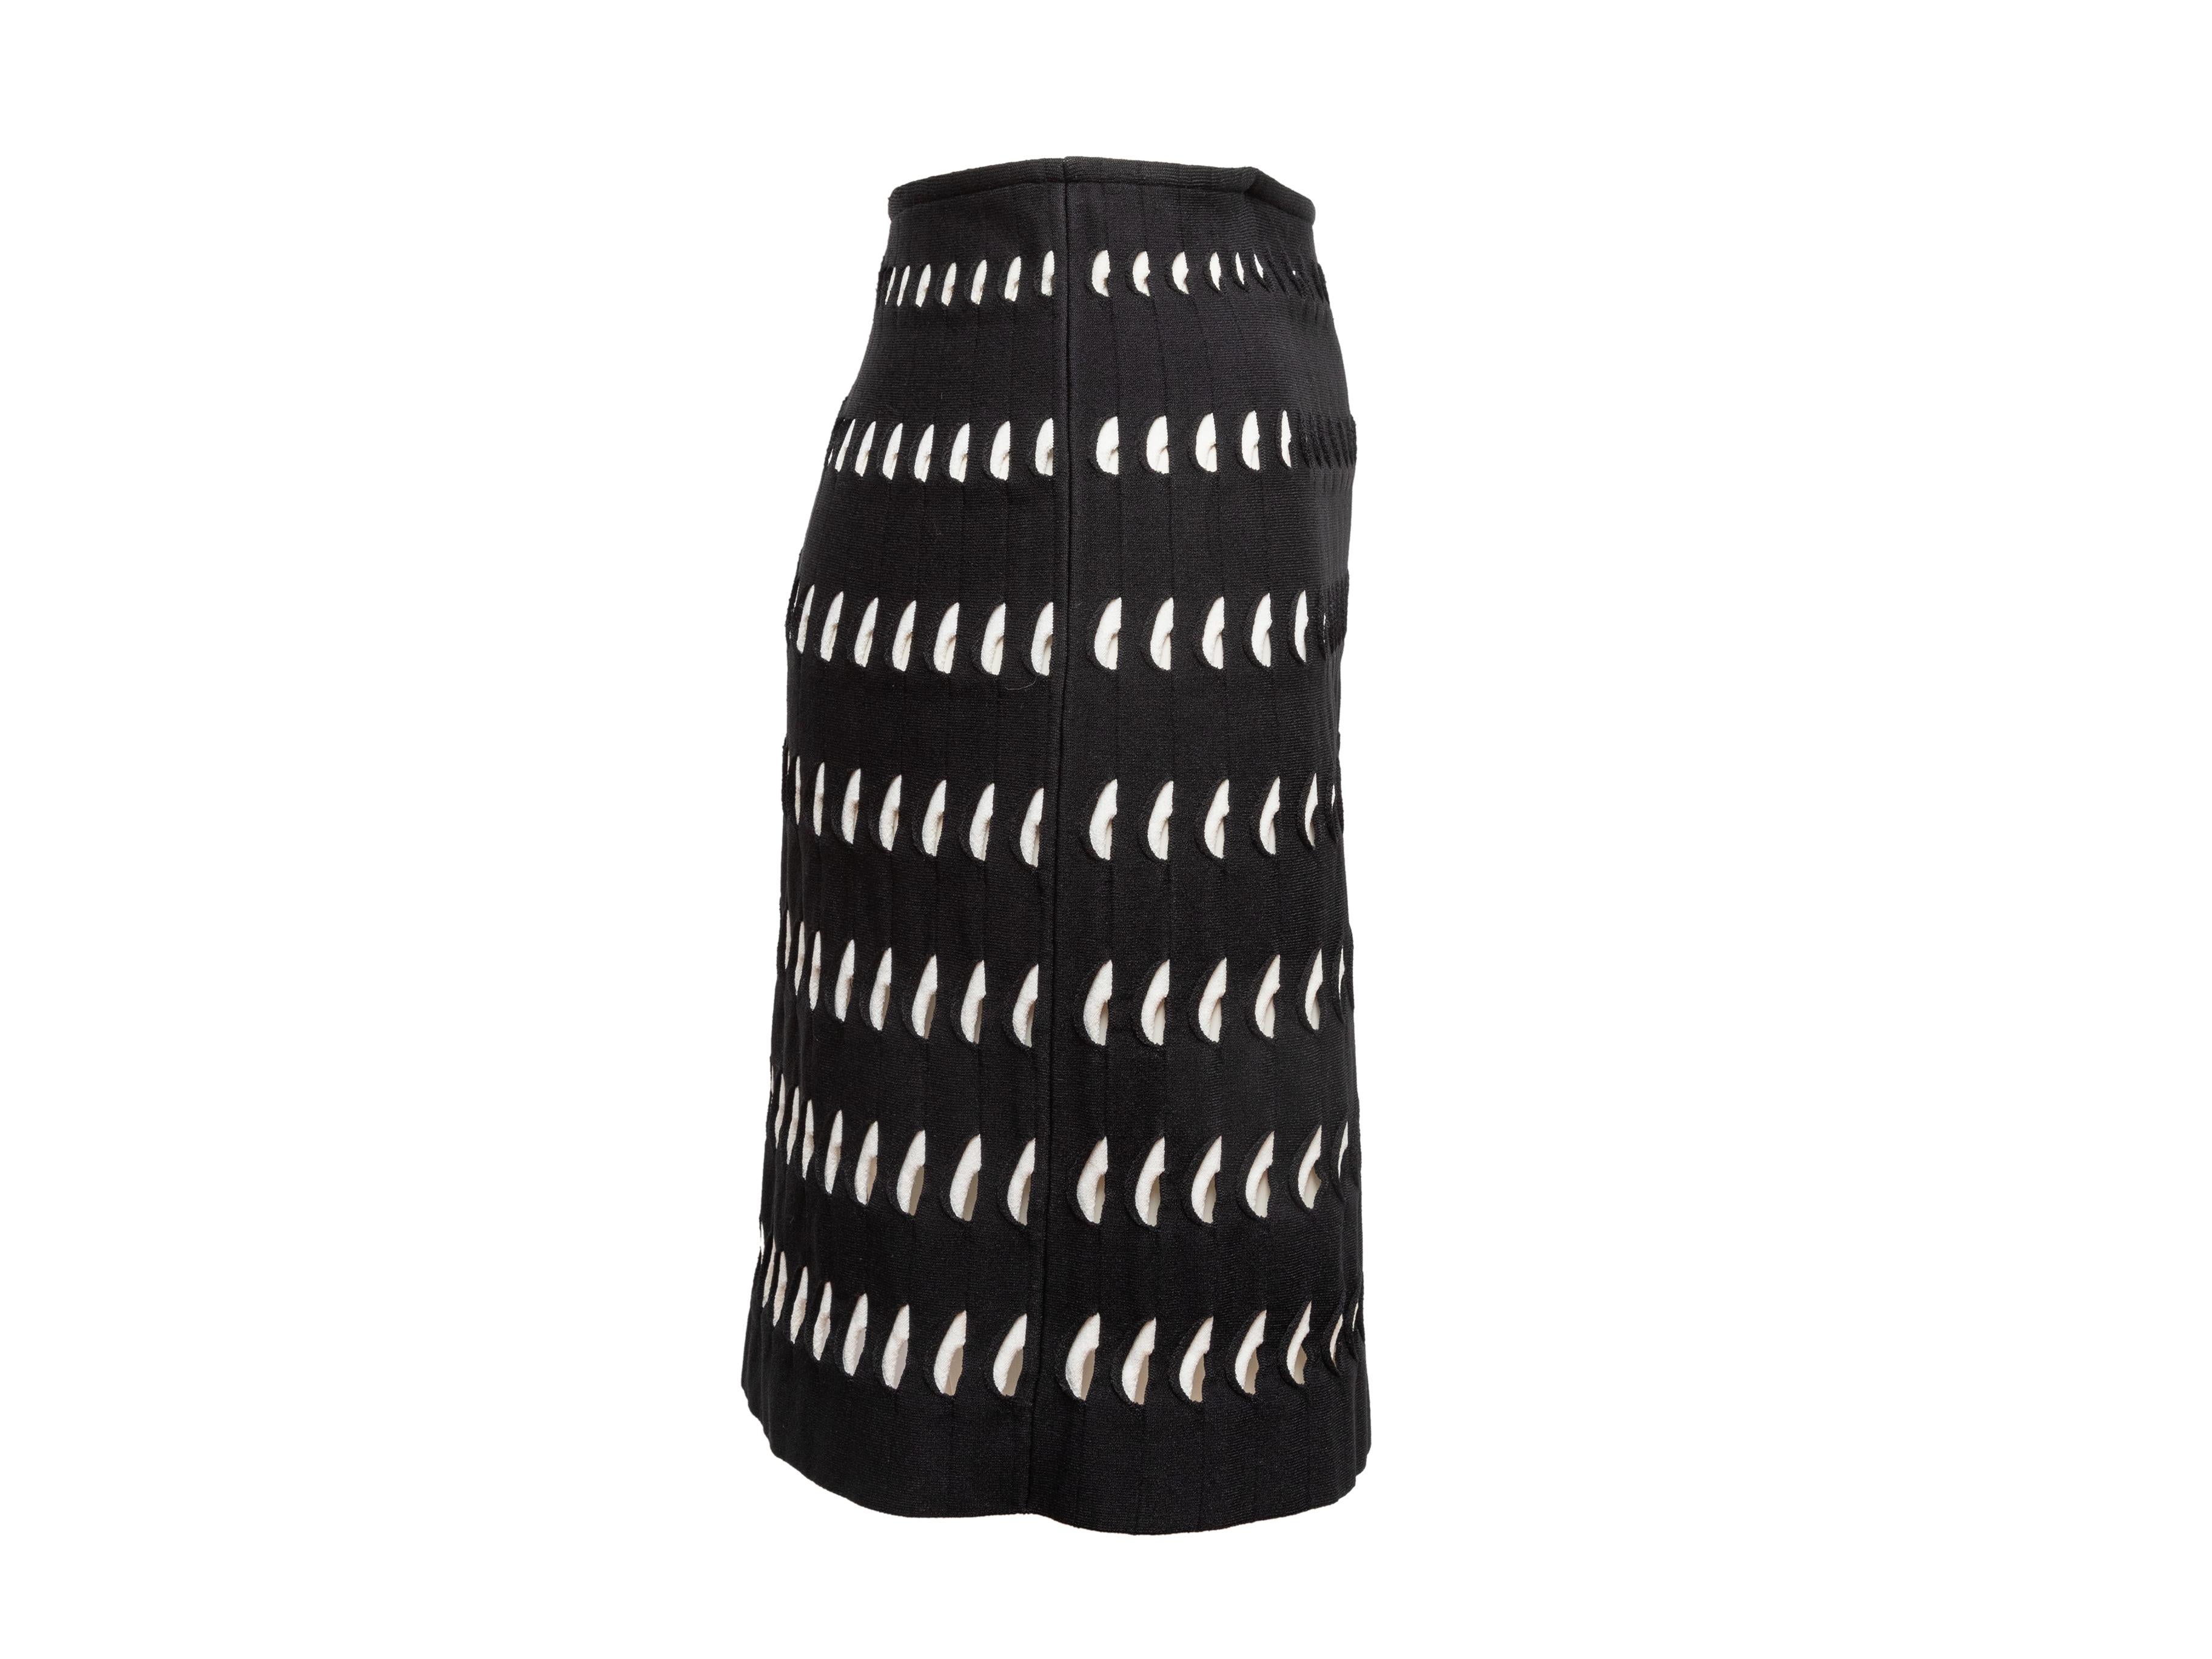 Product Details: Black and white cutout pleated skirt by Alaia. Elasticized waistband. 26